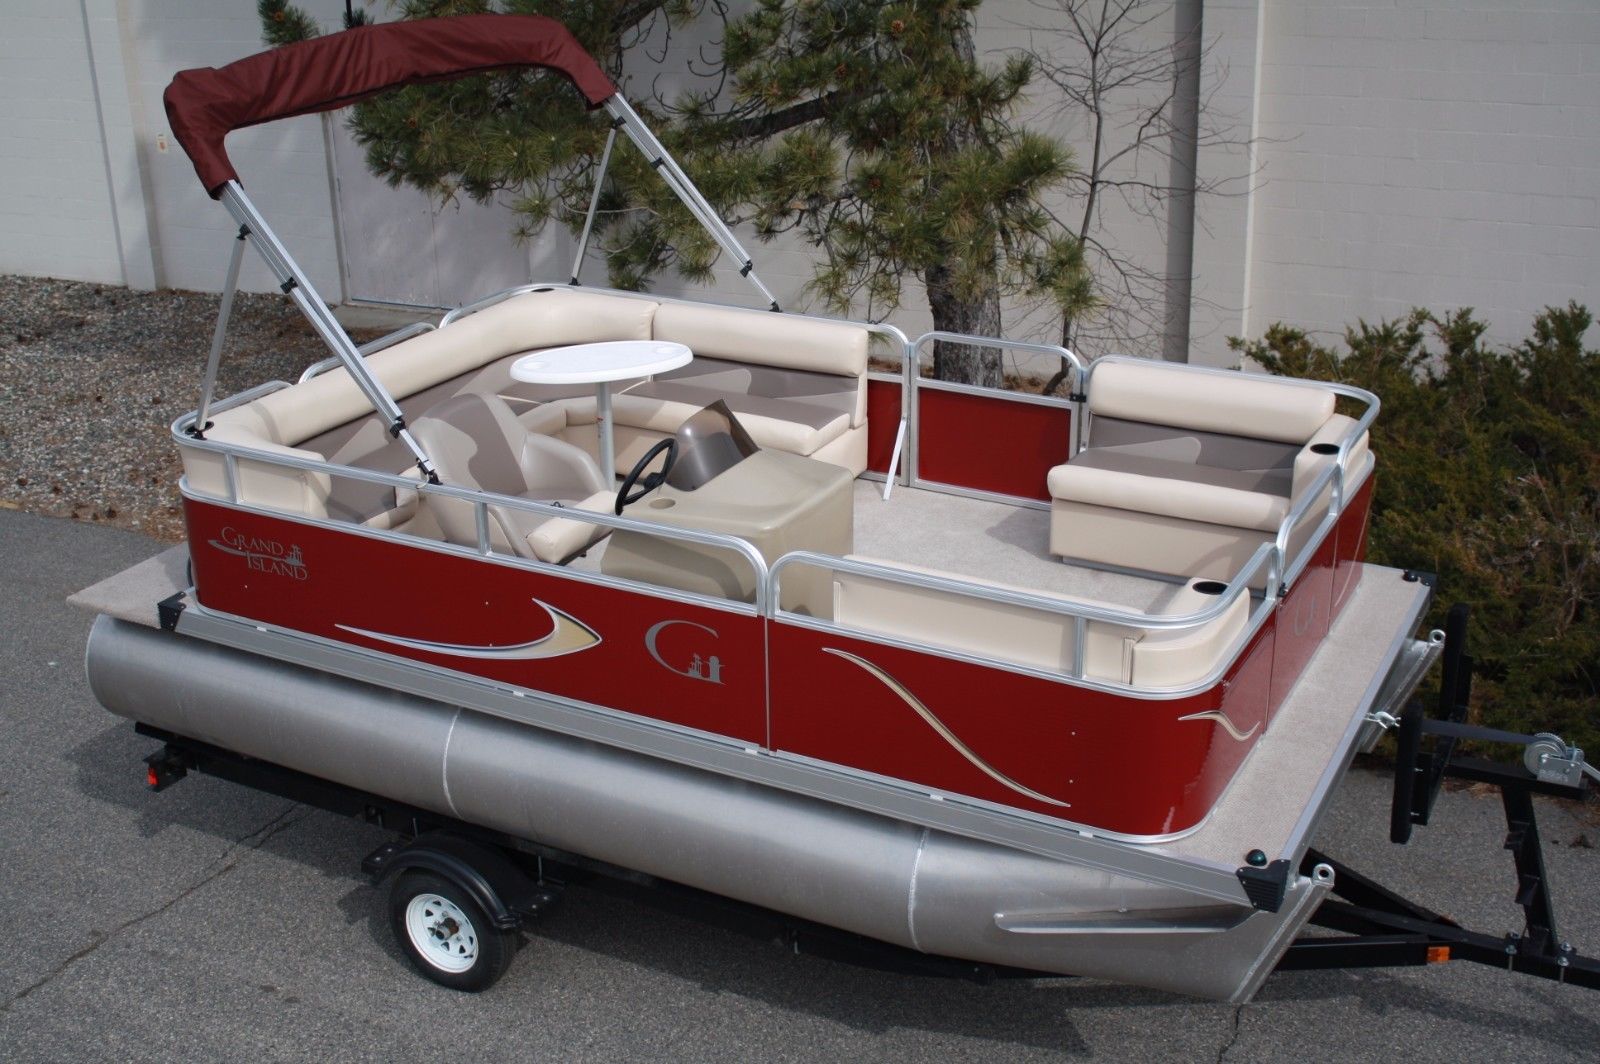 Grand Island 16 Grand Island G Series 2018 for sale for $10,495.